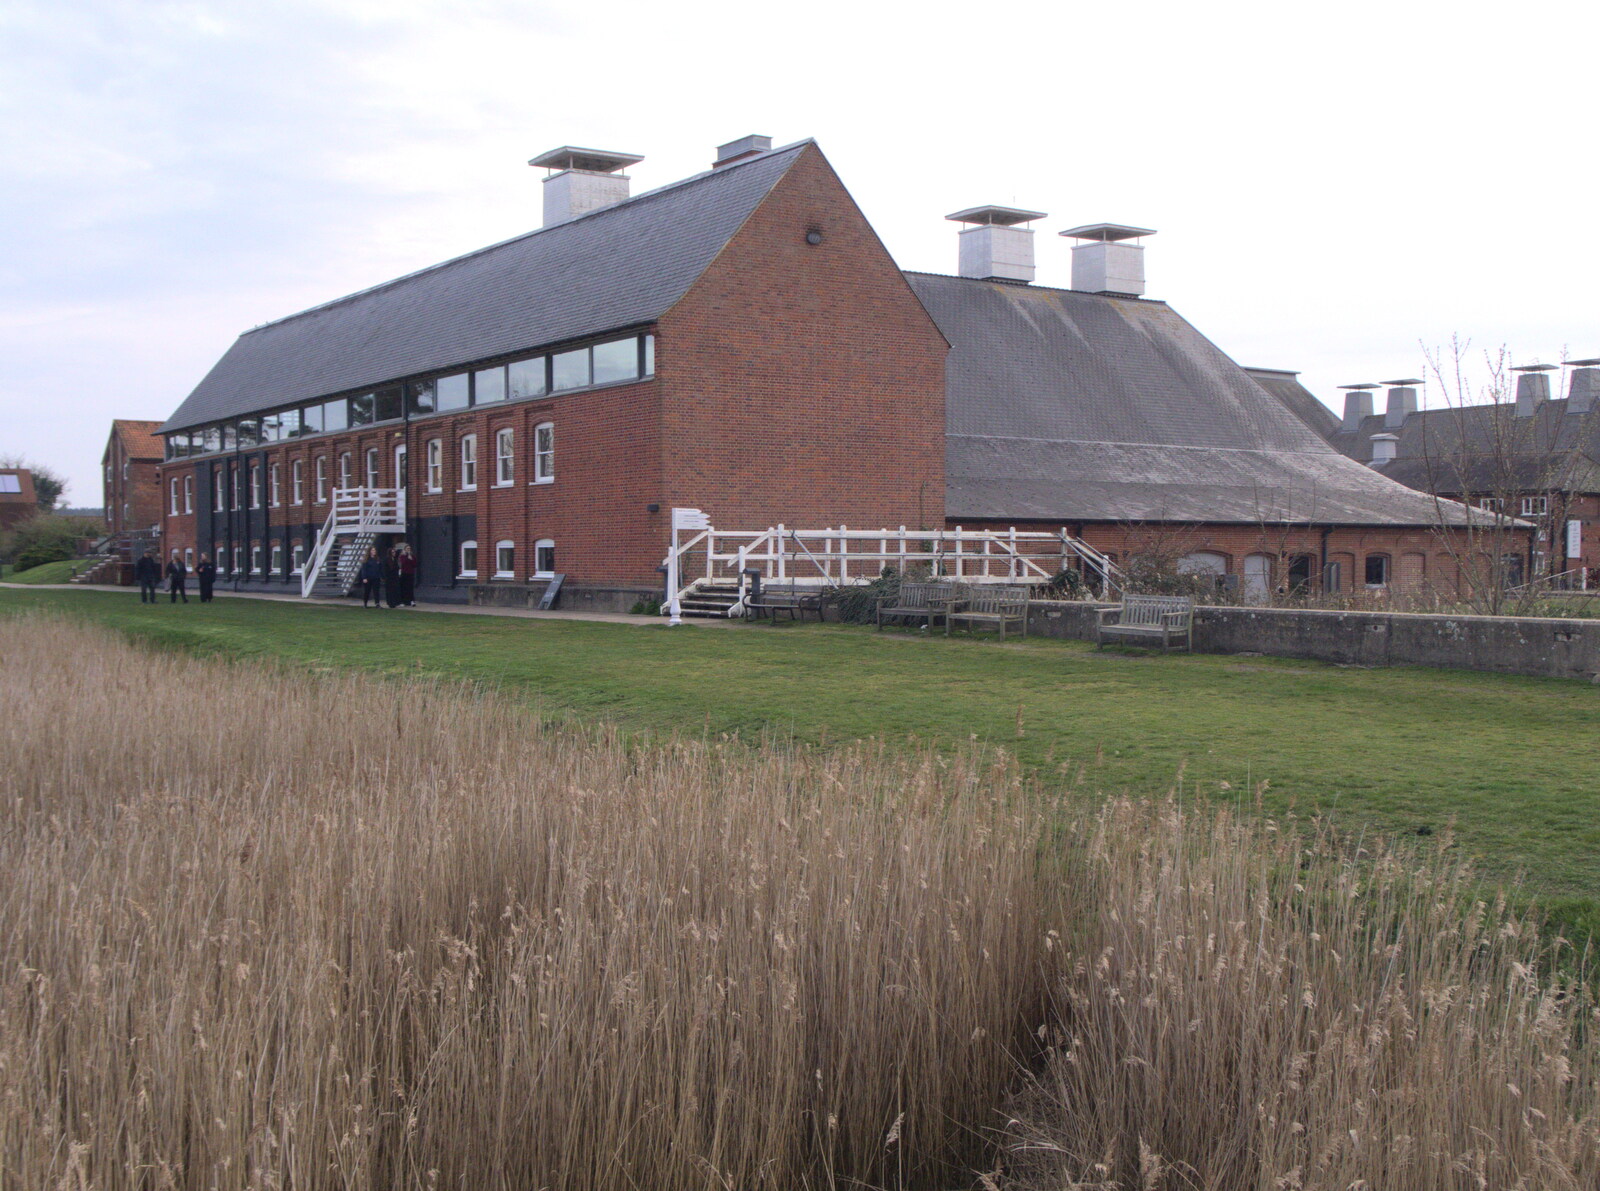 A view of Snape Maltings from the river from Fred and the Orchestra, Snape Maltings, Suffolk - 5th April